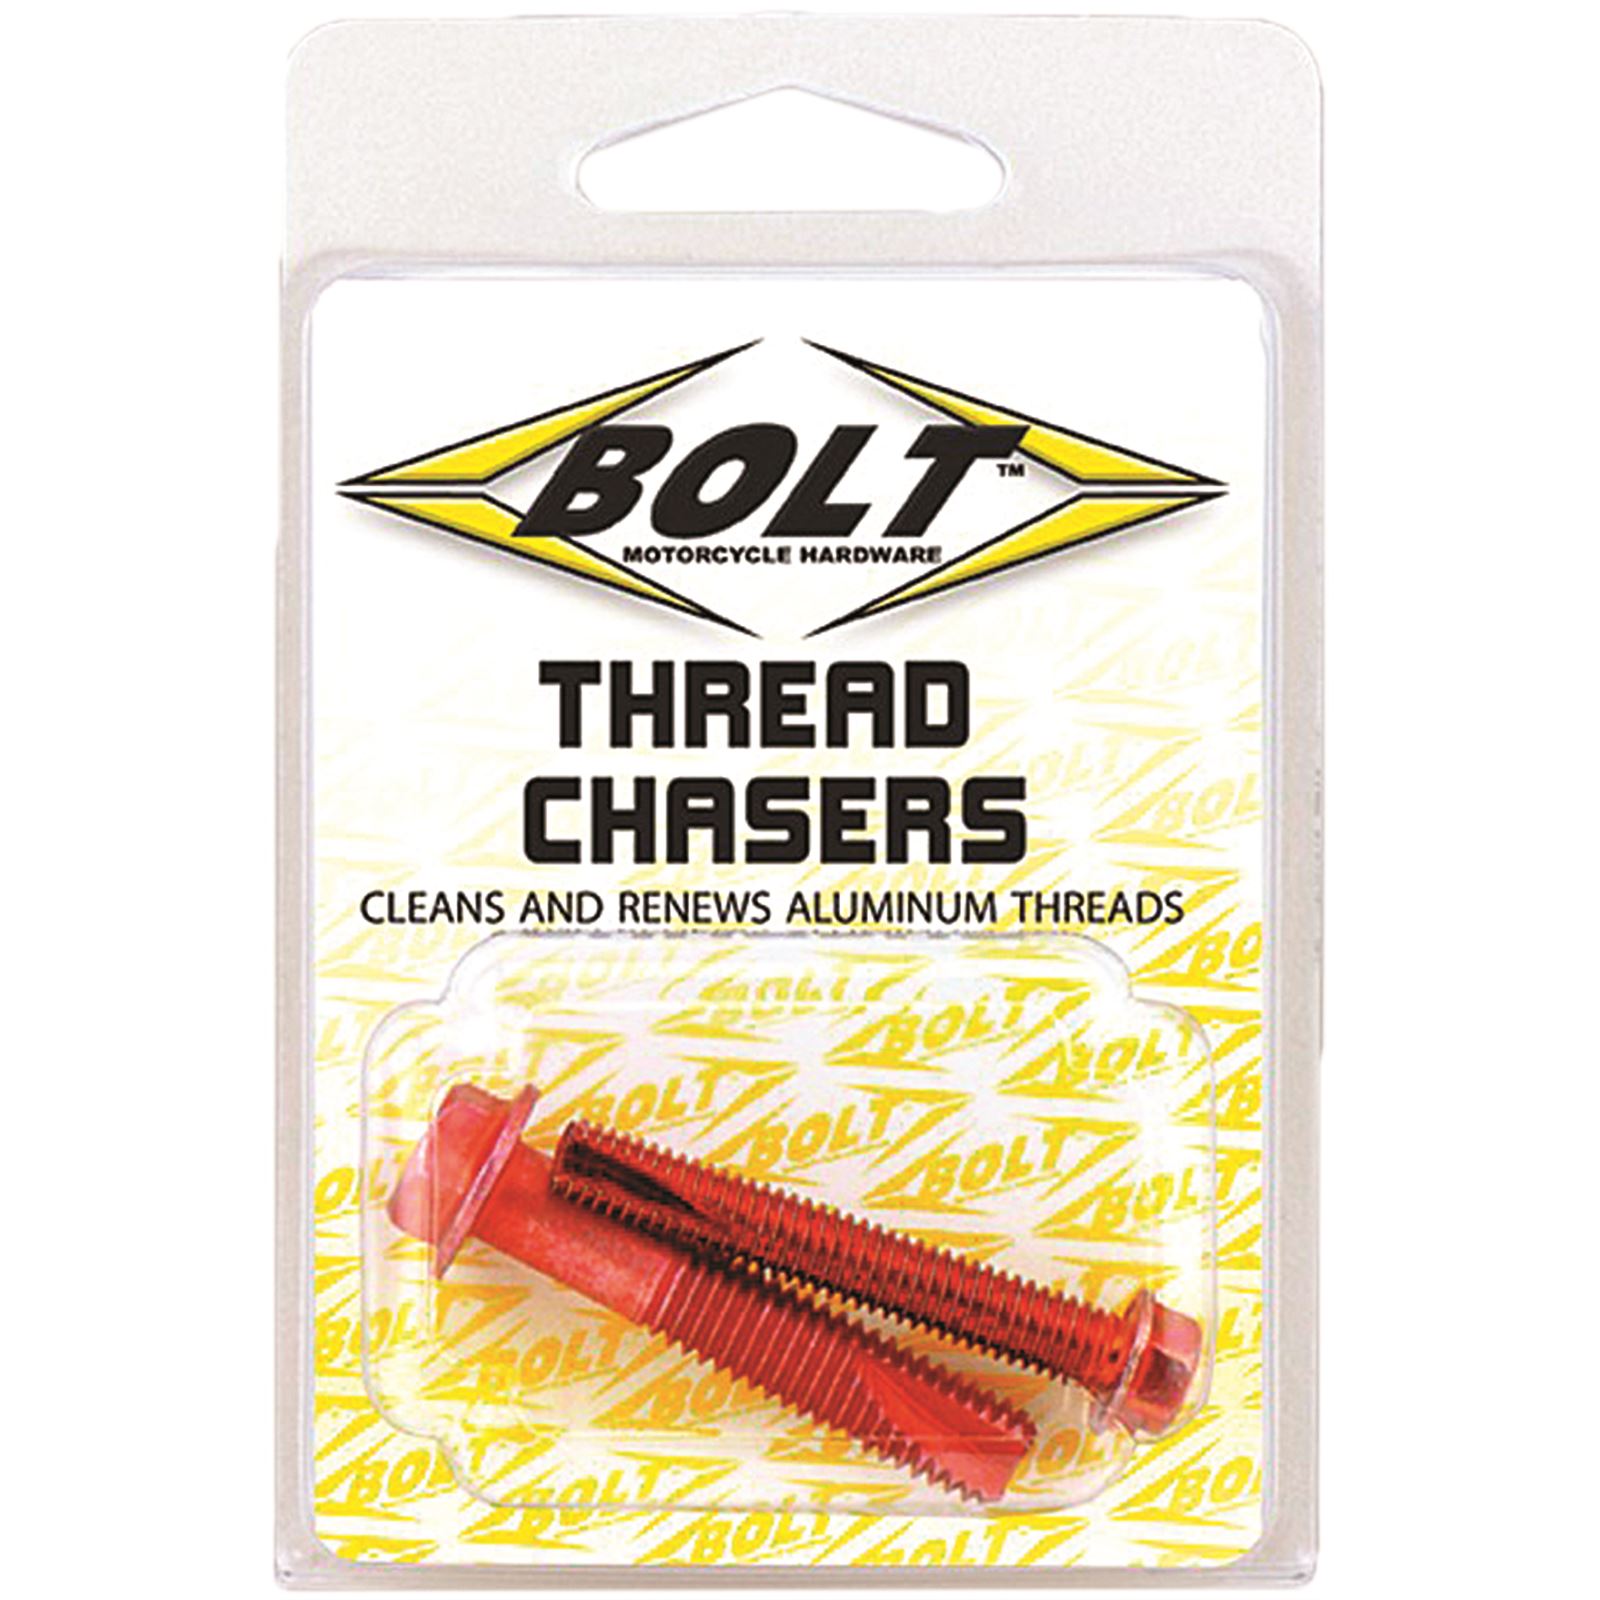 Bolt Motorcycle Hardware Thread Chasers 6mm and 8mm Motorcyle ATV 020-00010 